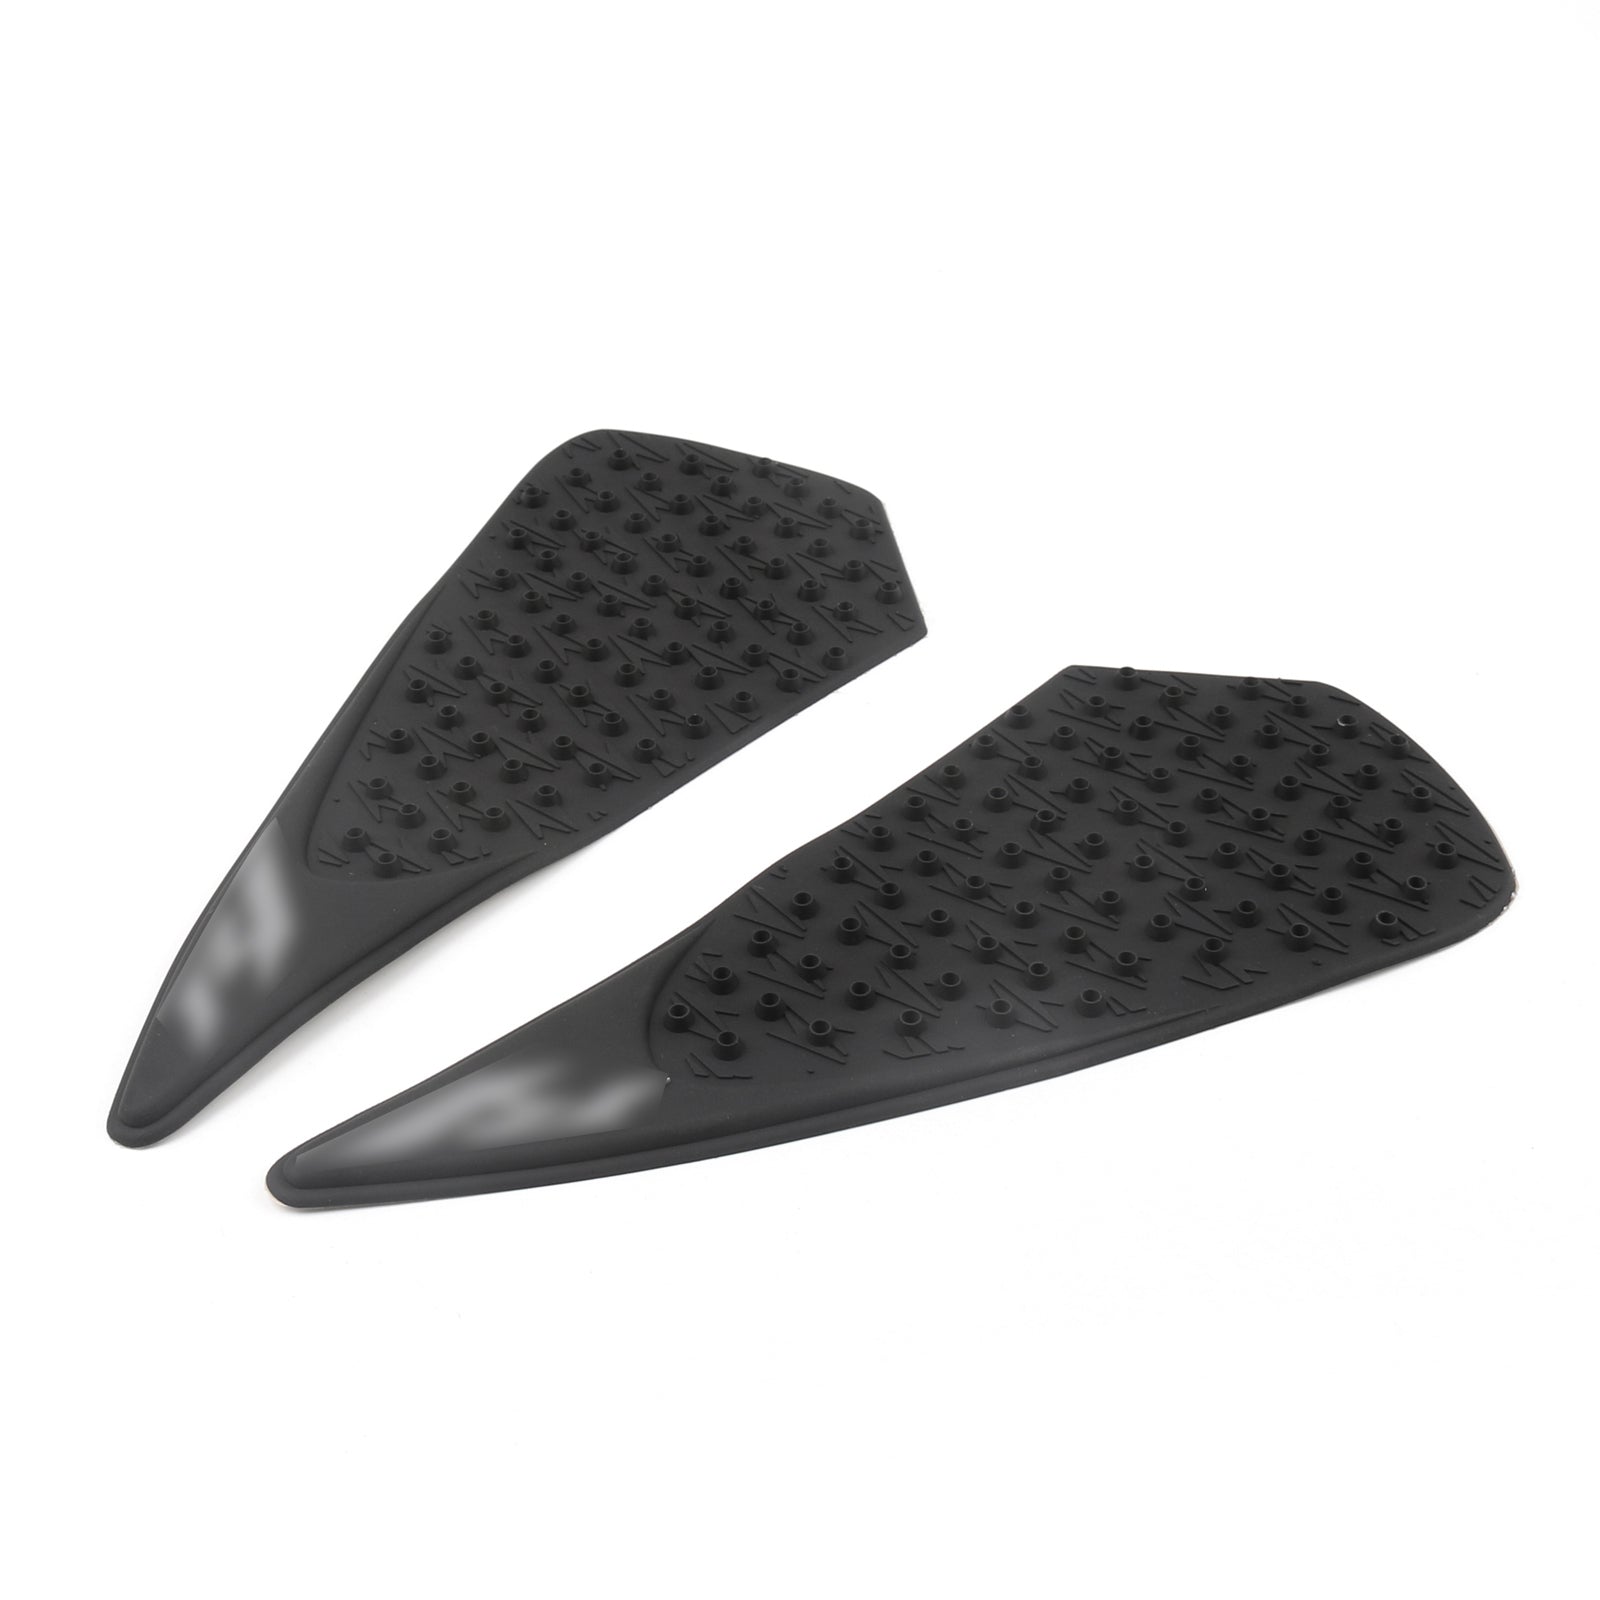 Yamaha Side Tank Traction Grips Pads Protector Fit For YZF-R1 YZF R1 2004-2006 Black